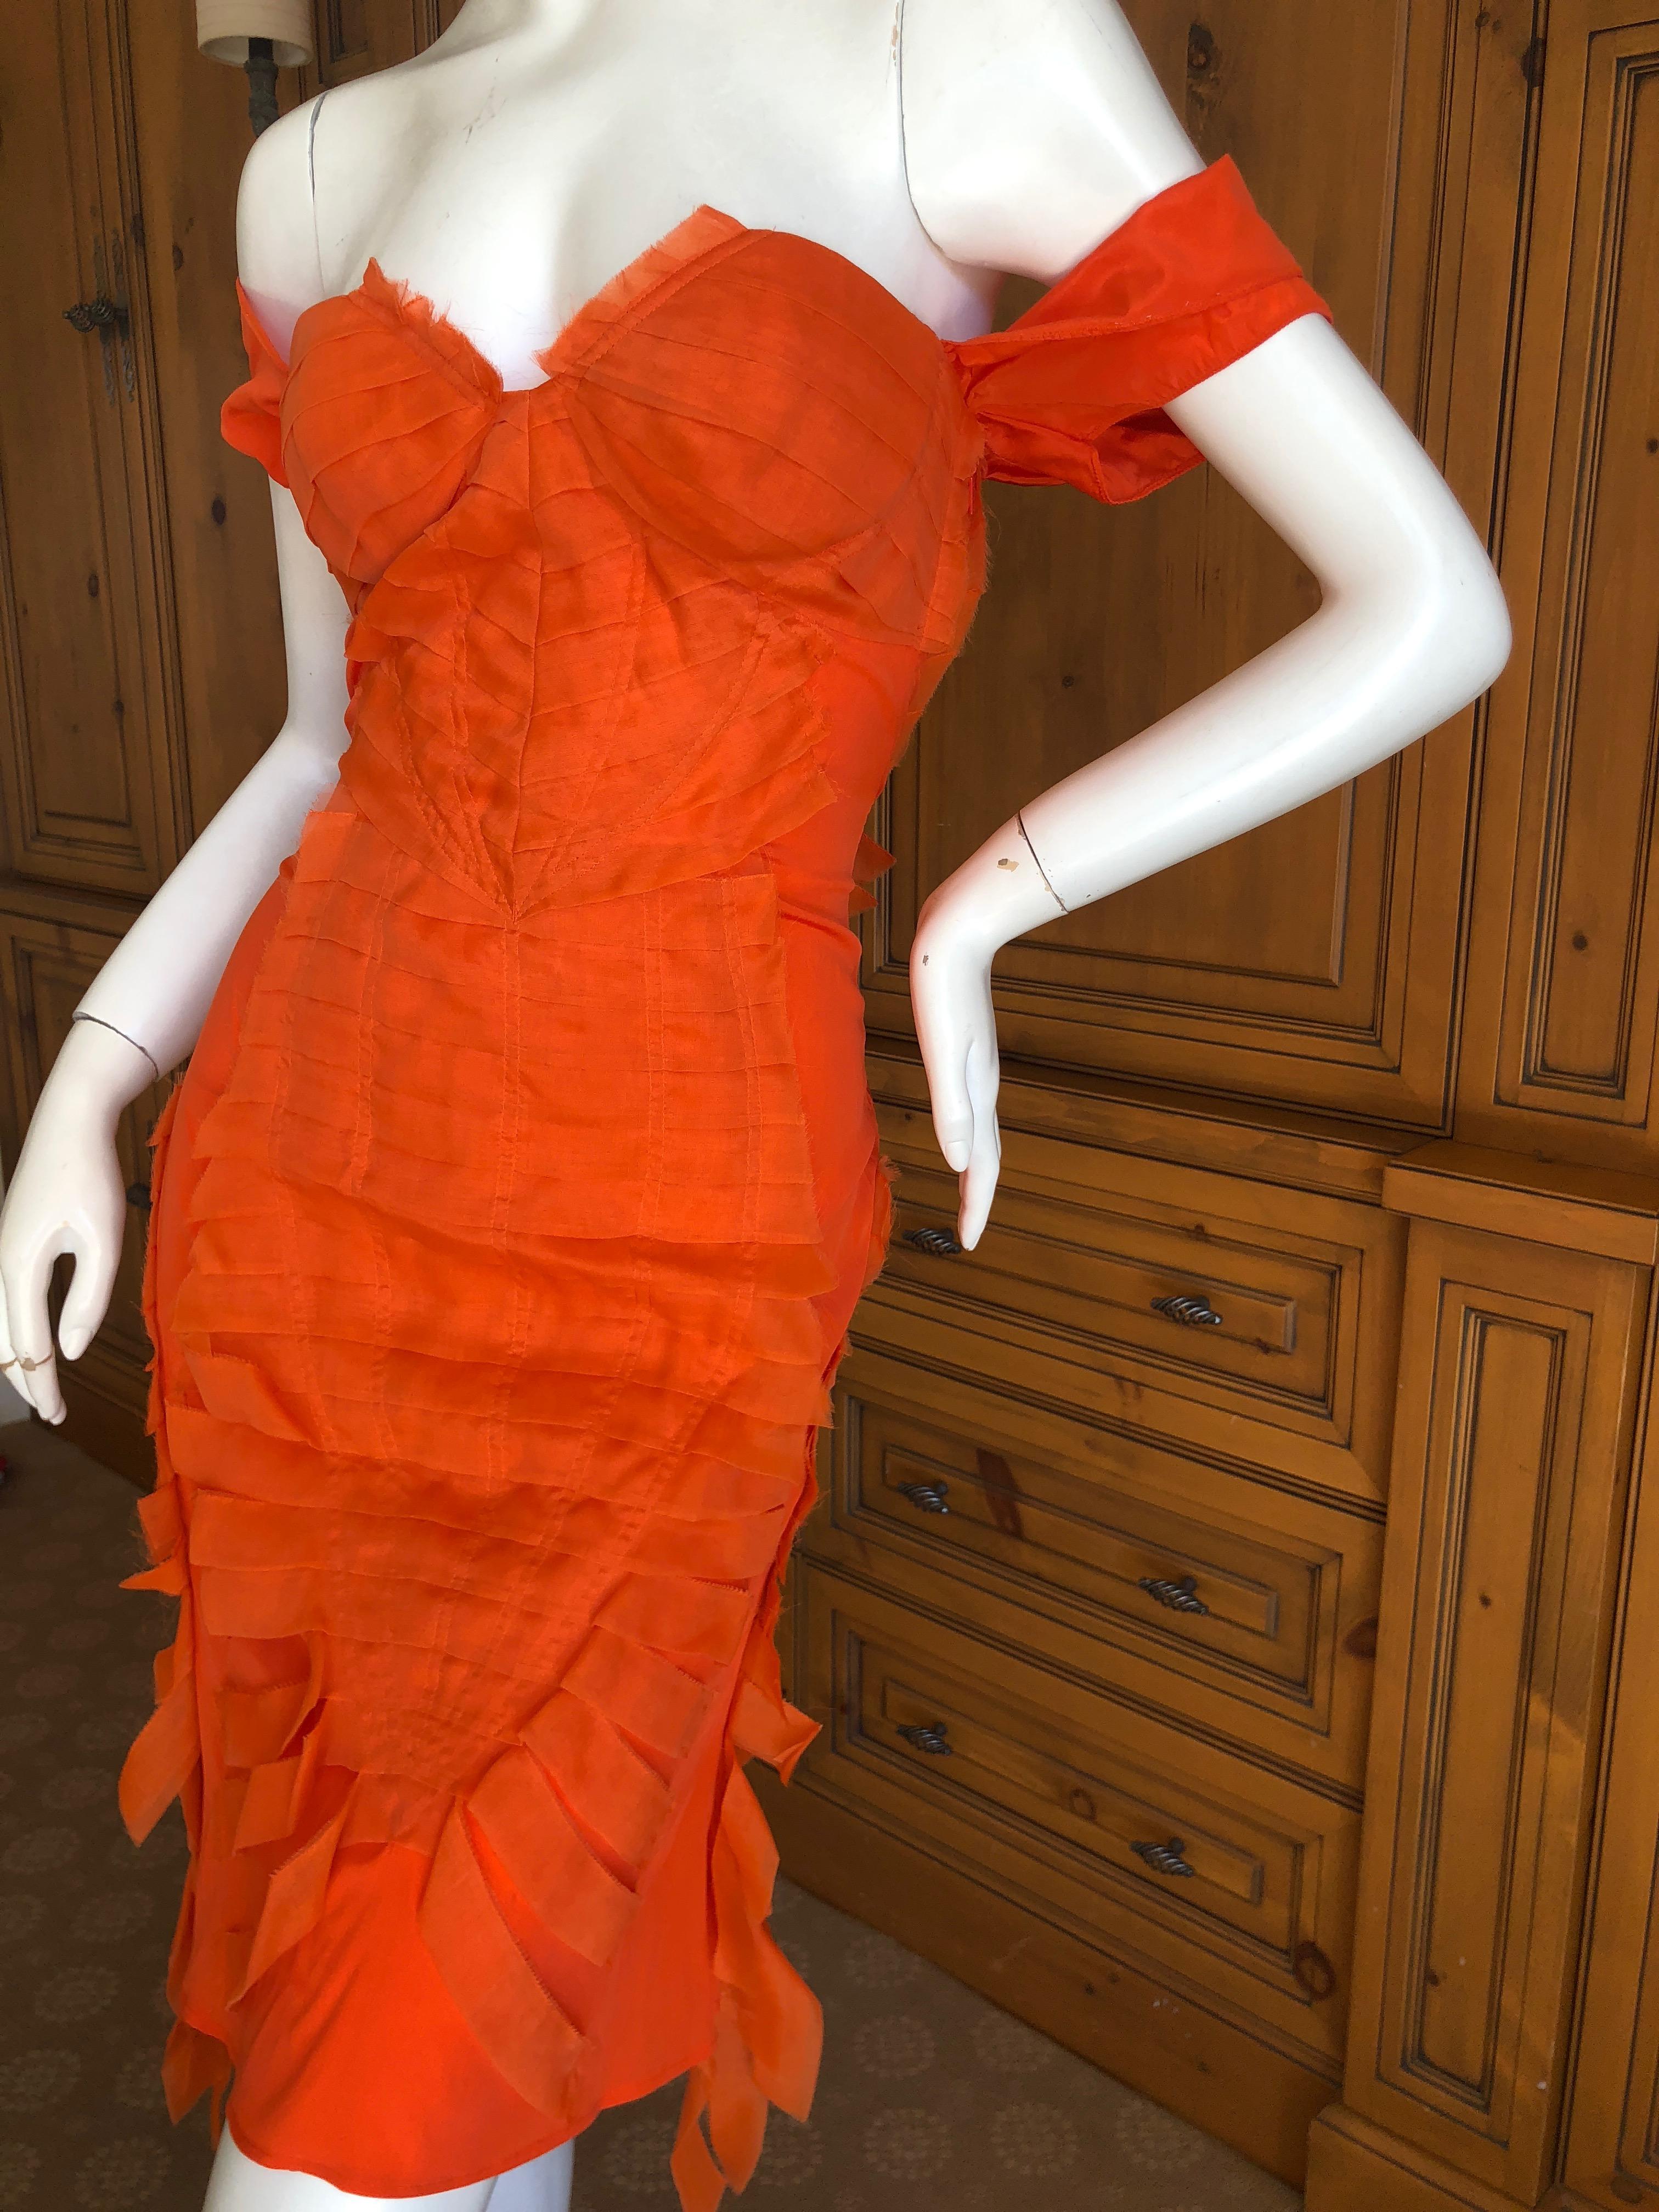 Gucci by Tom Ford 2004 Orange Ribbon Dress Tom Ford Book Piece  For Sale 1